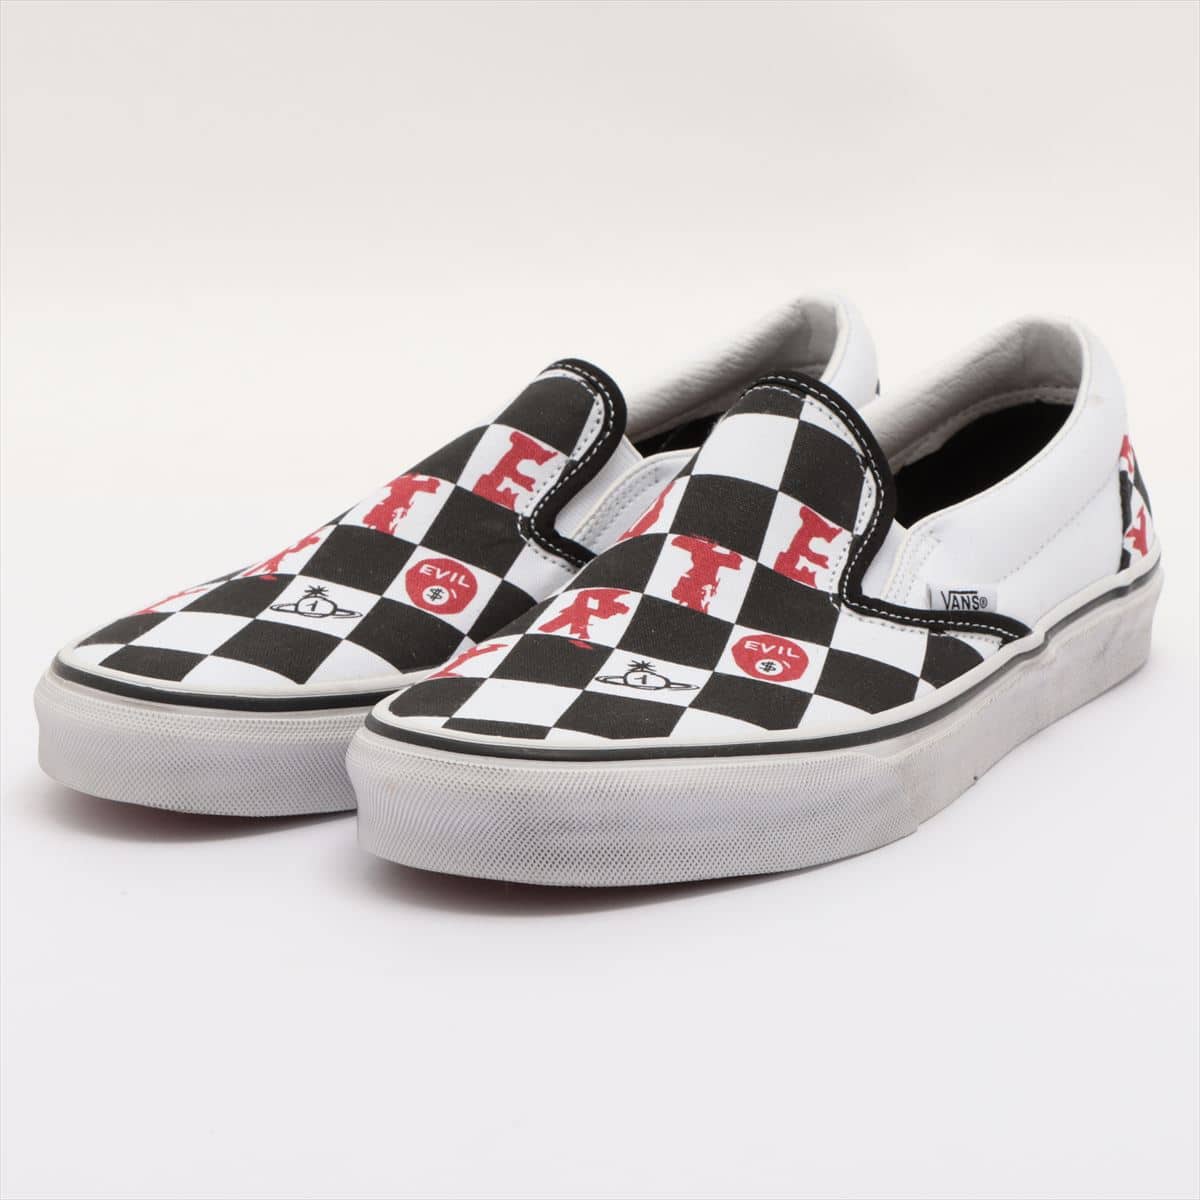 Vivienne Westwood 19AW canvas Slip-on 26 Men's Black × White Anglomania checkerboard Classic Distressed processing